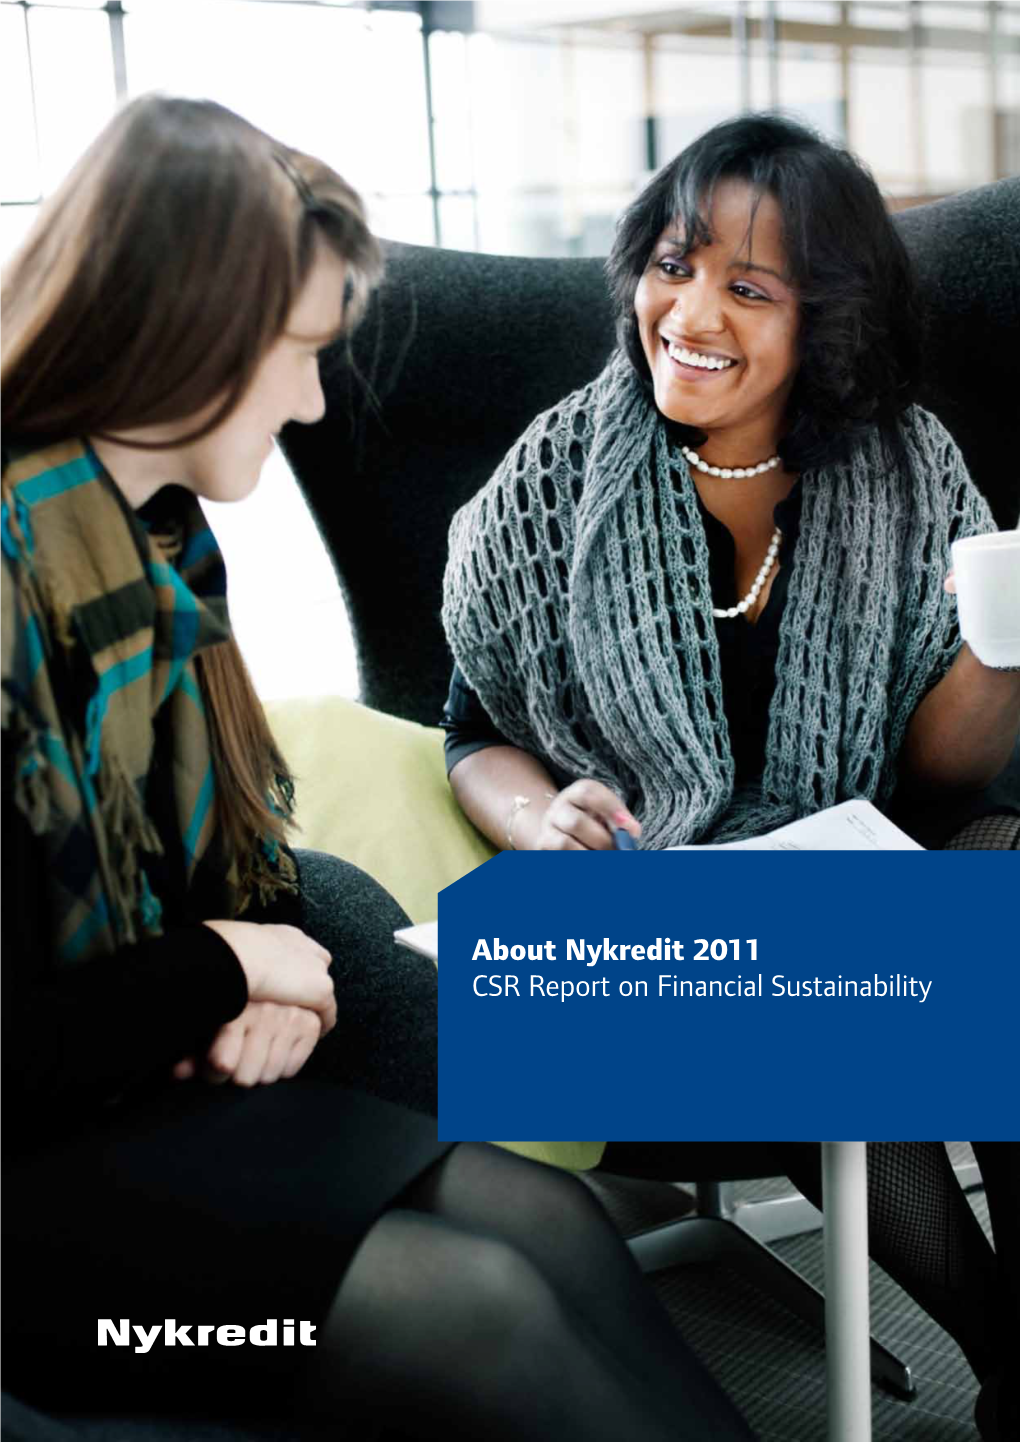 About Nykredit 2011 CSR Report on Financial Sustainability Contents